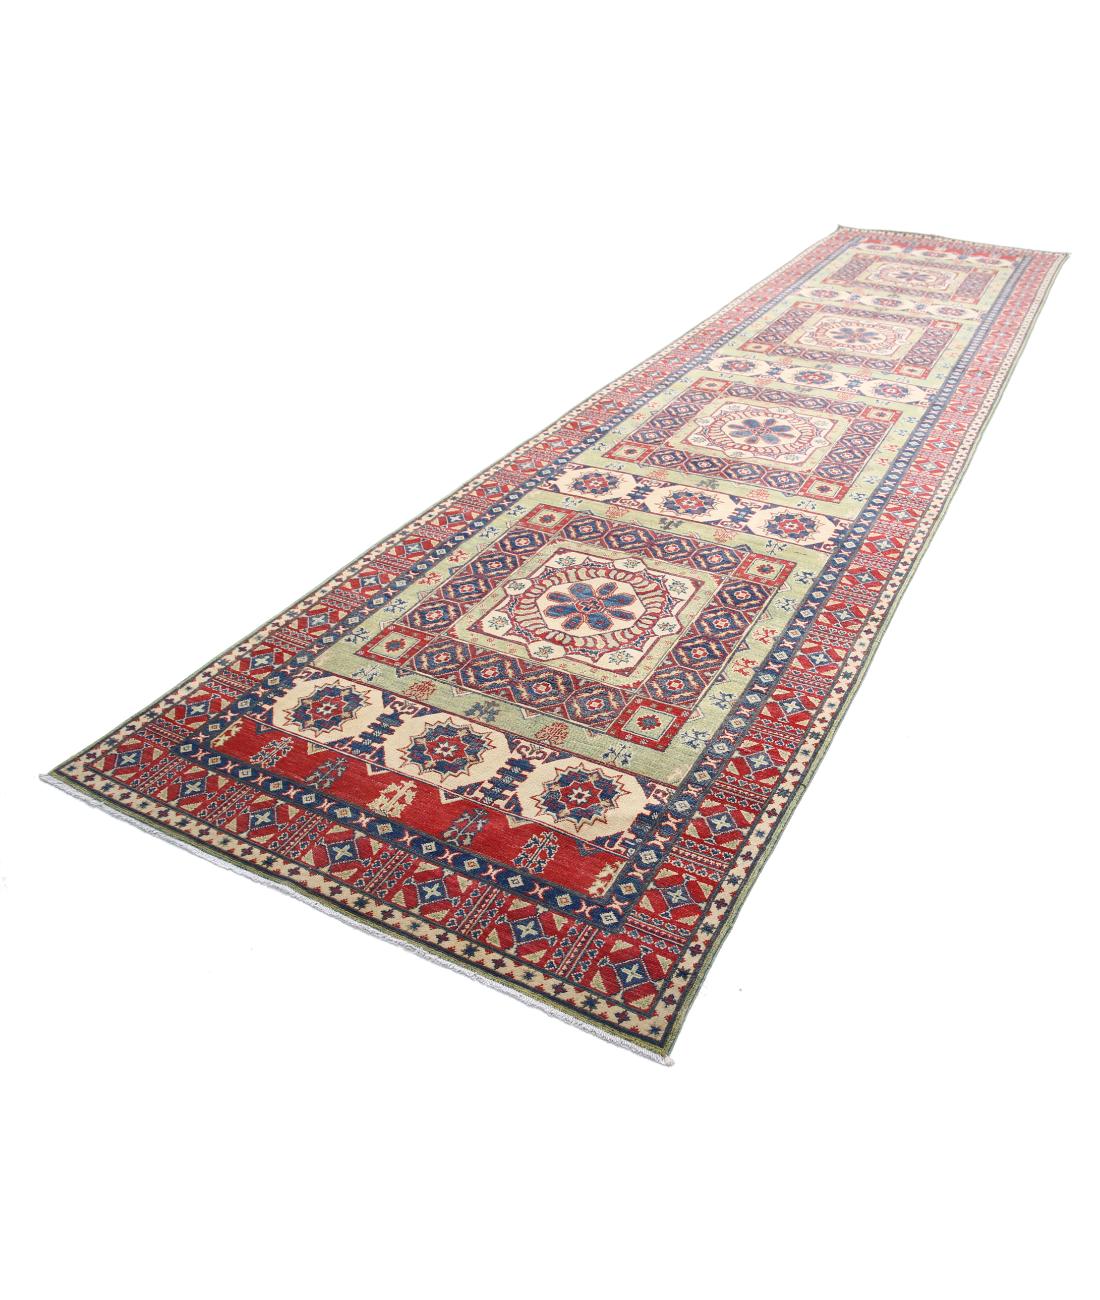 Hand Knotted Tribal Kazak Wool Rug - 4'10'' x 19'4'' 4' 10" X 19' 4" (147 X 589) / Red / Ivory